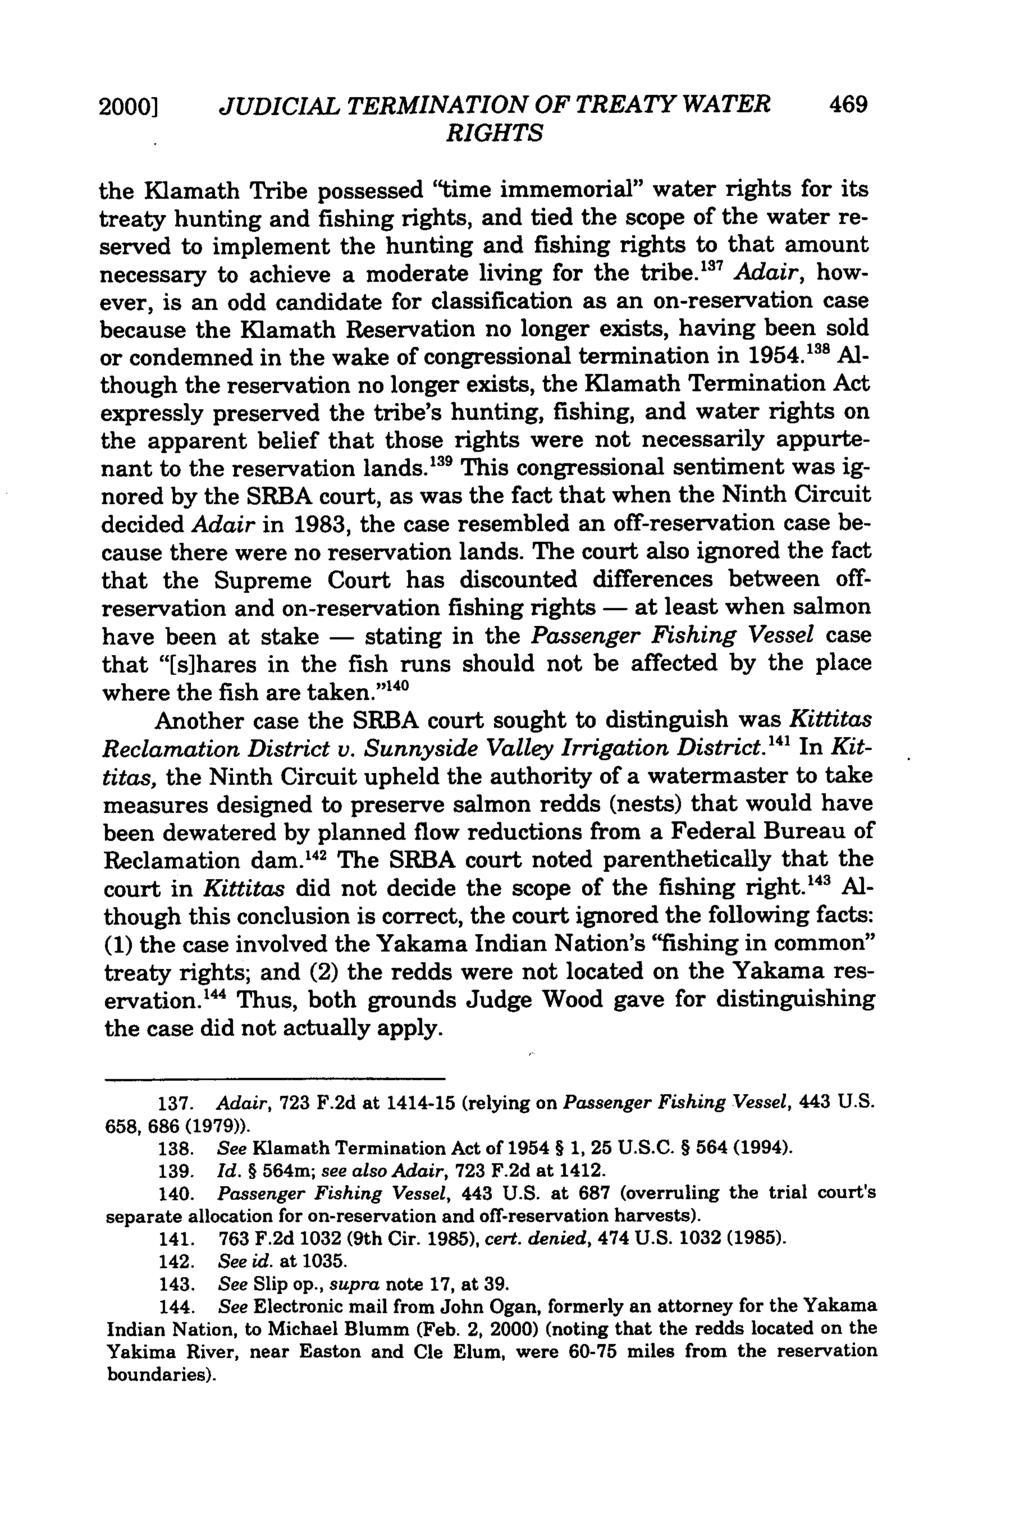 2000] JUDICIAL TERMINATION OF TREATY WATER 469 RIGHTS the Kiamath Tribe possessed 'time immemorial" water rights for its treaty hunting and fishing rights, and tied the scope of the water reserved to